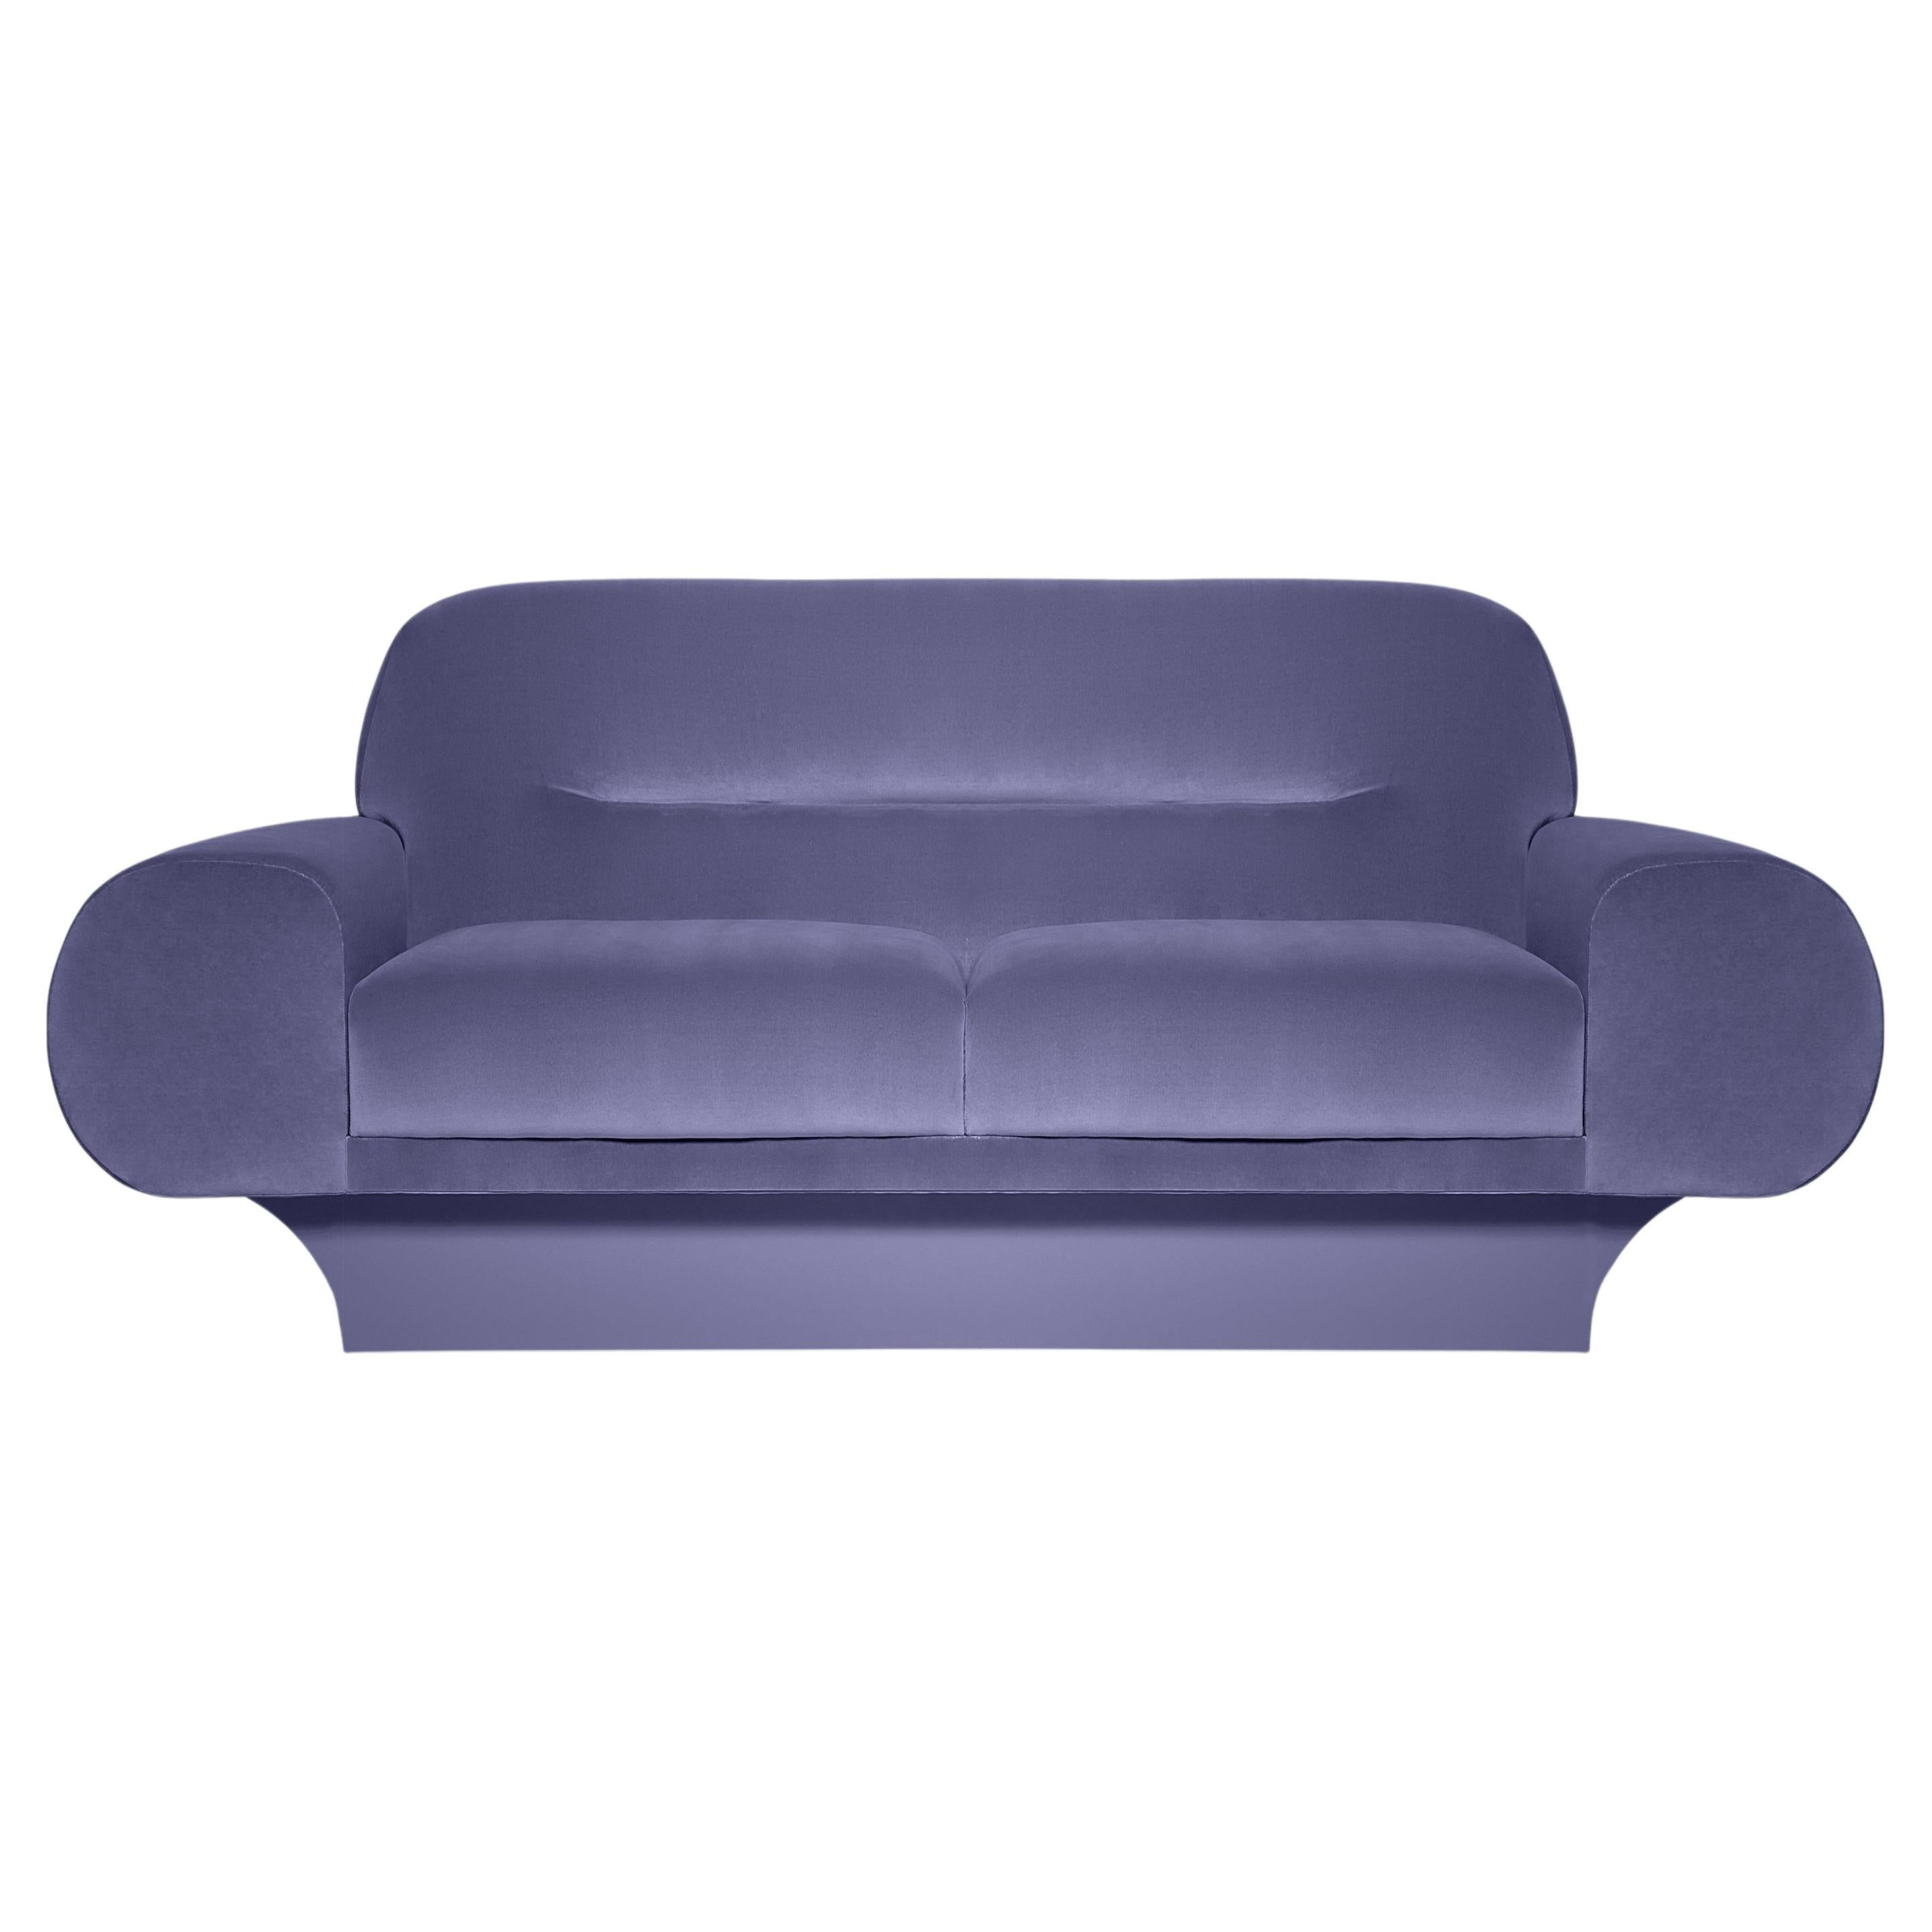 This sofa has an impactful Silhouette. The oversized softly curved arms and back work in either formal and more casual settings, it has relaxed comfort in mind. It’s grand, curvy and charismatic.
Upholstery: High Resistance Velvet 
Footer: Lacquer